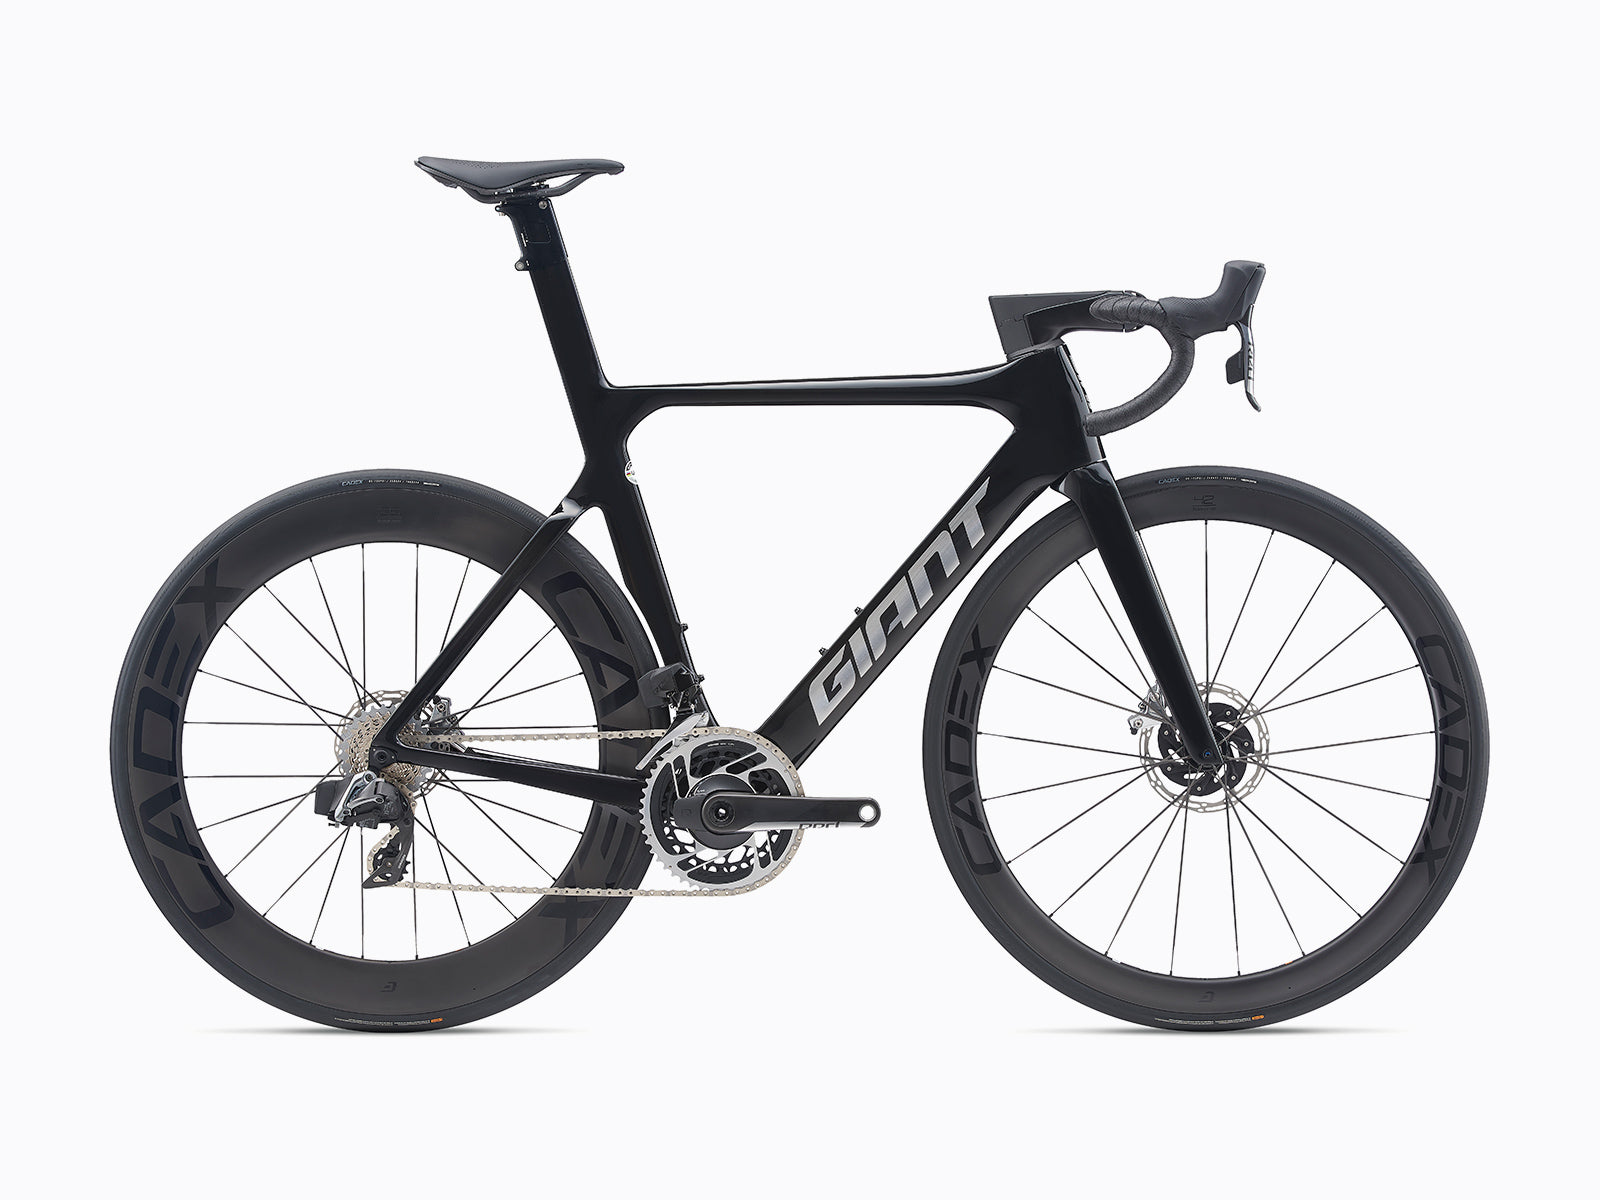 image features the Giant Propel Advanced SL 0, a performance road bike on sale at Melbourne bike shop